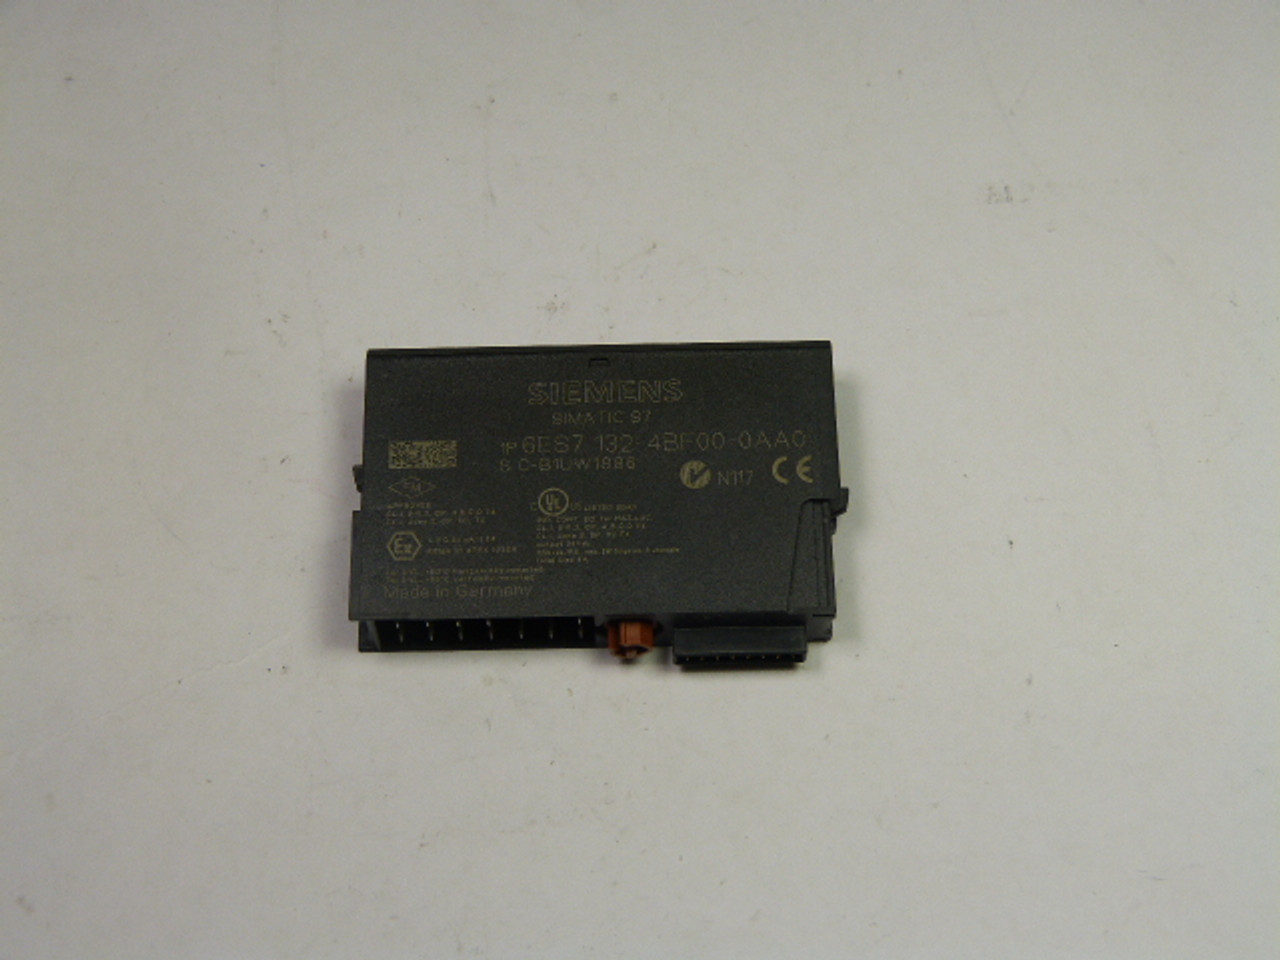 Siemens 6ES7-132-4BF00-0AA0 Output Module 24 VDC .5 A USED